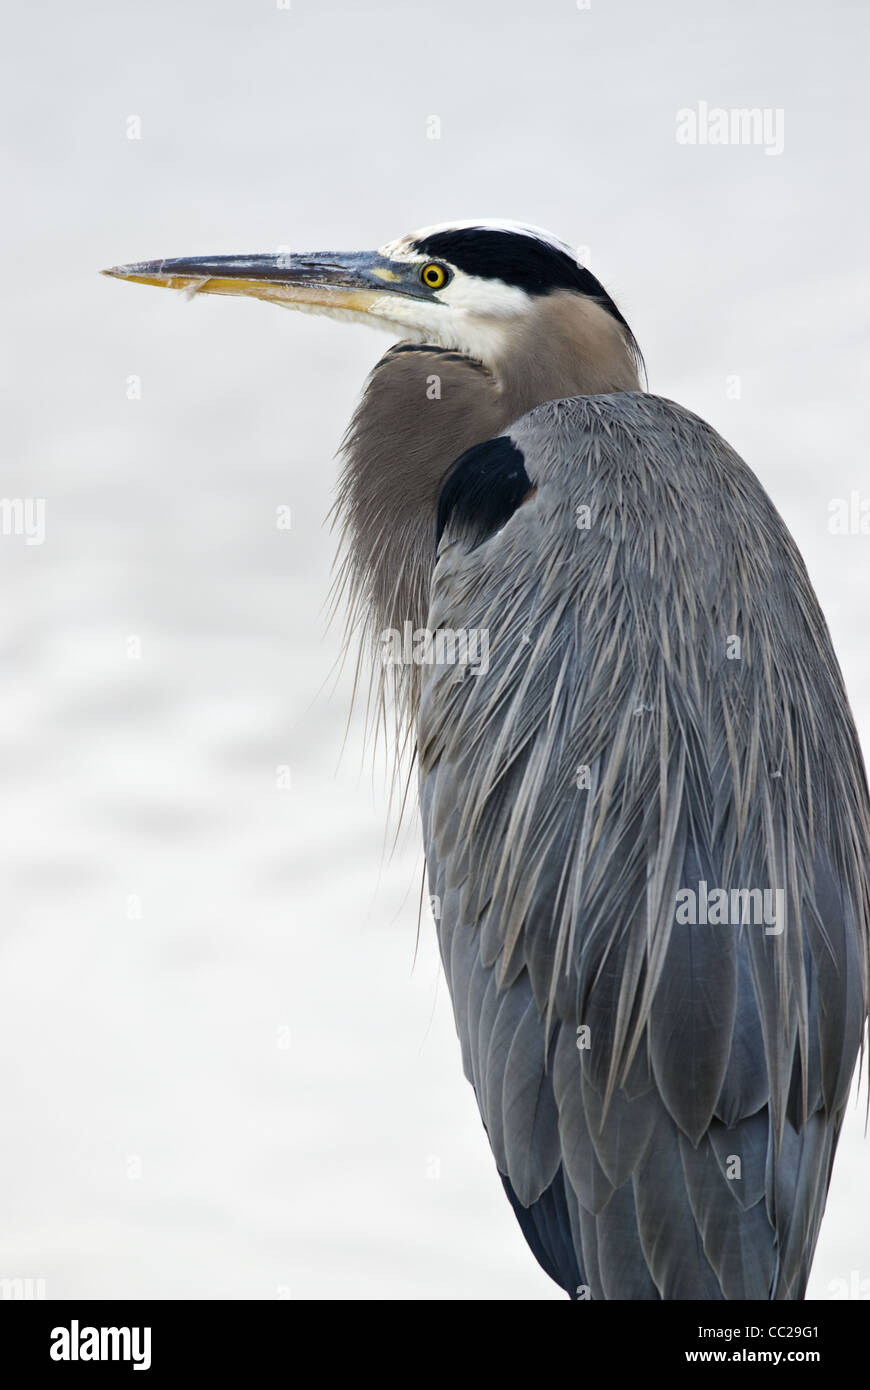 Great Blue Heron, Bosque del Apache National Wildlife Refuge, New Mexico. Stockfoto